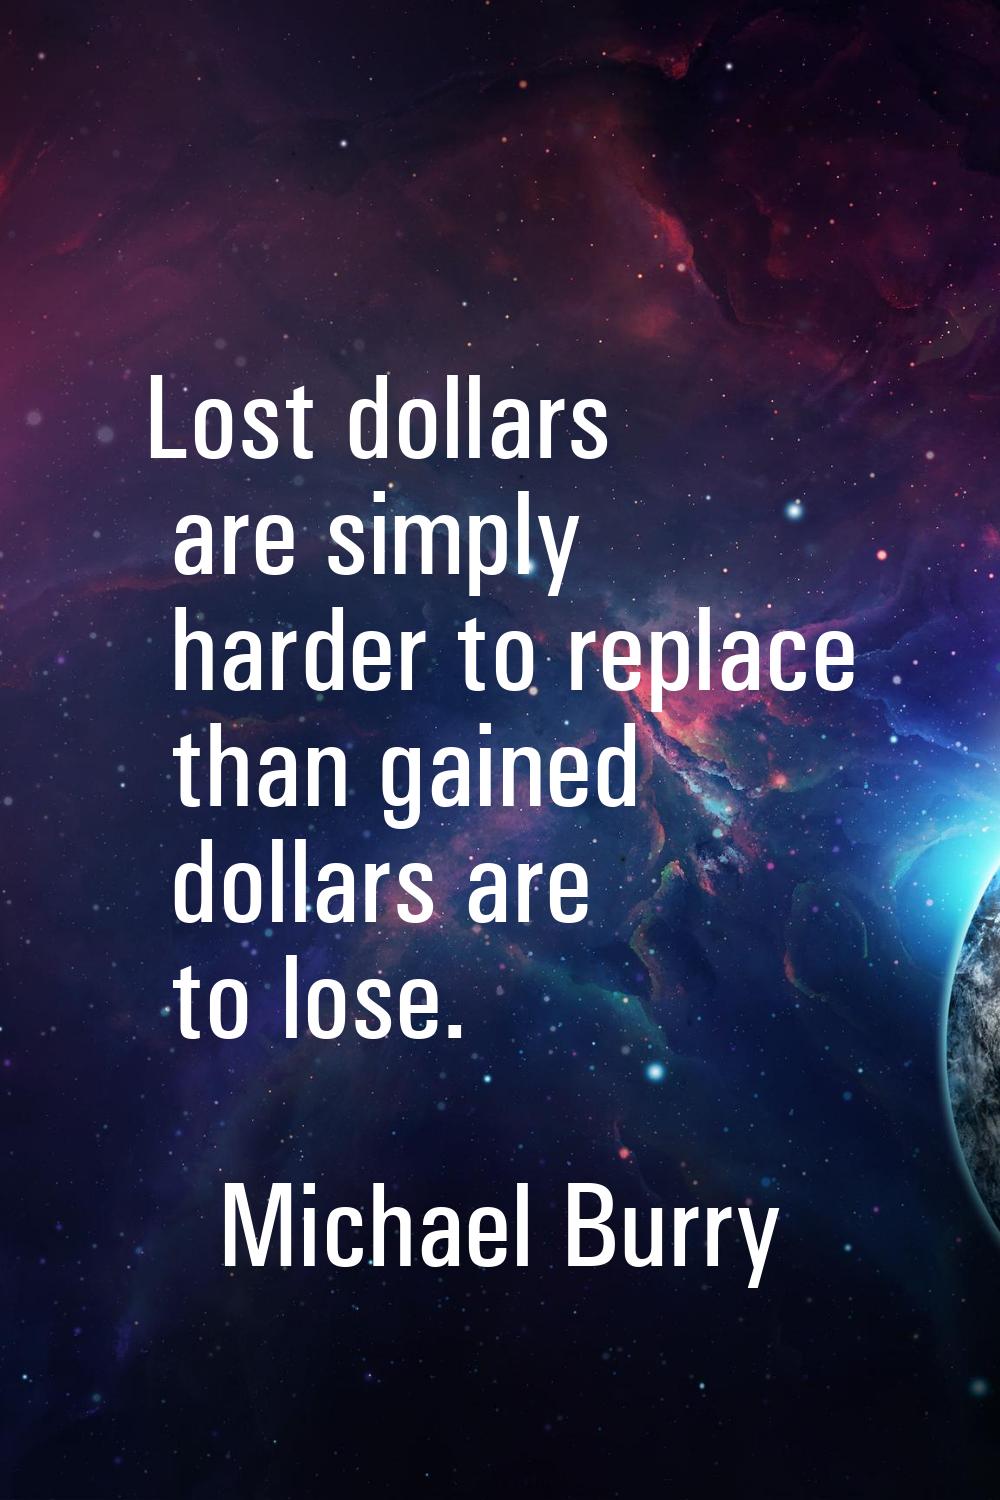 Lost dollars are simply harder to replace than gained dollars are to lose.